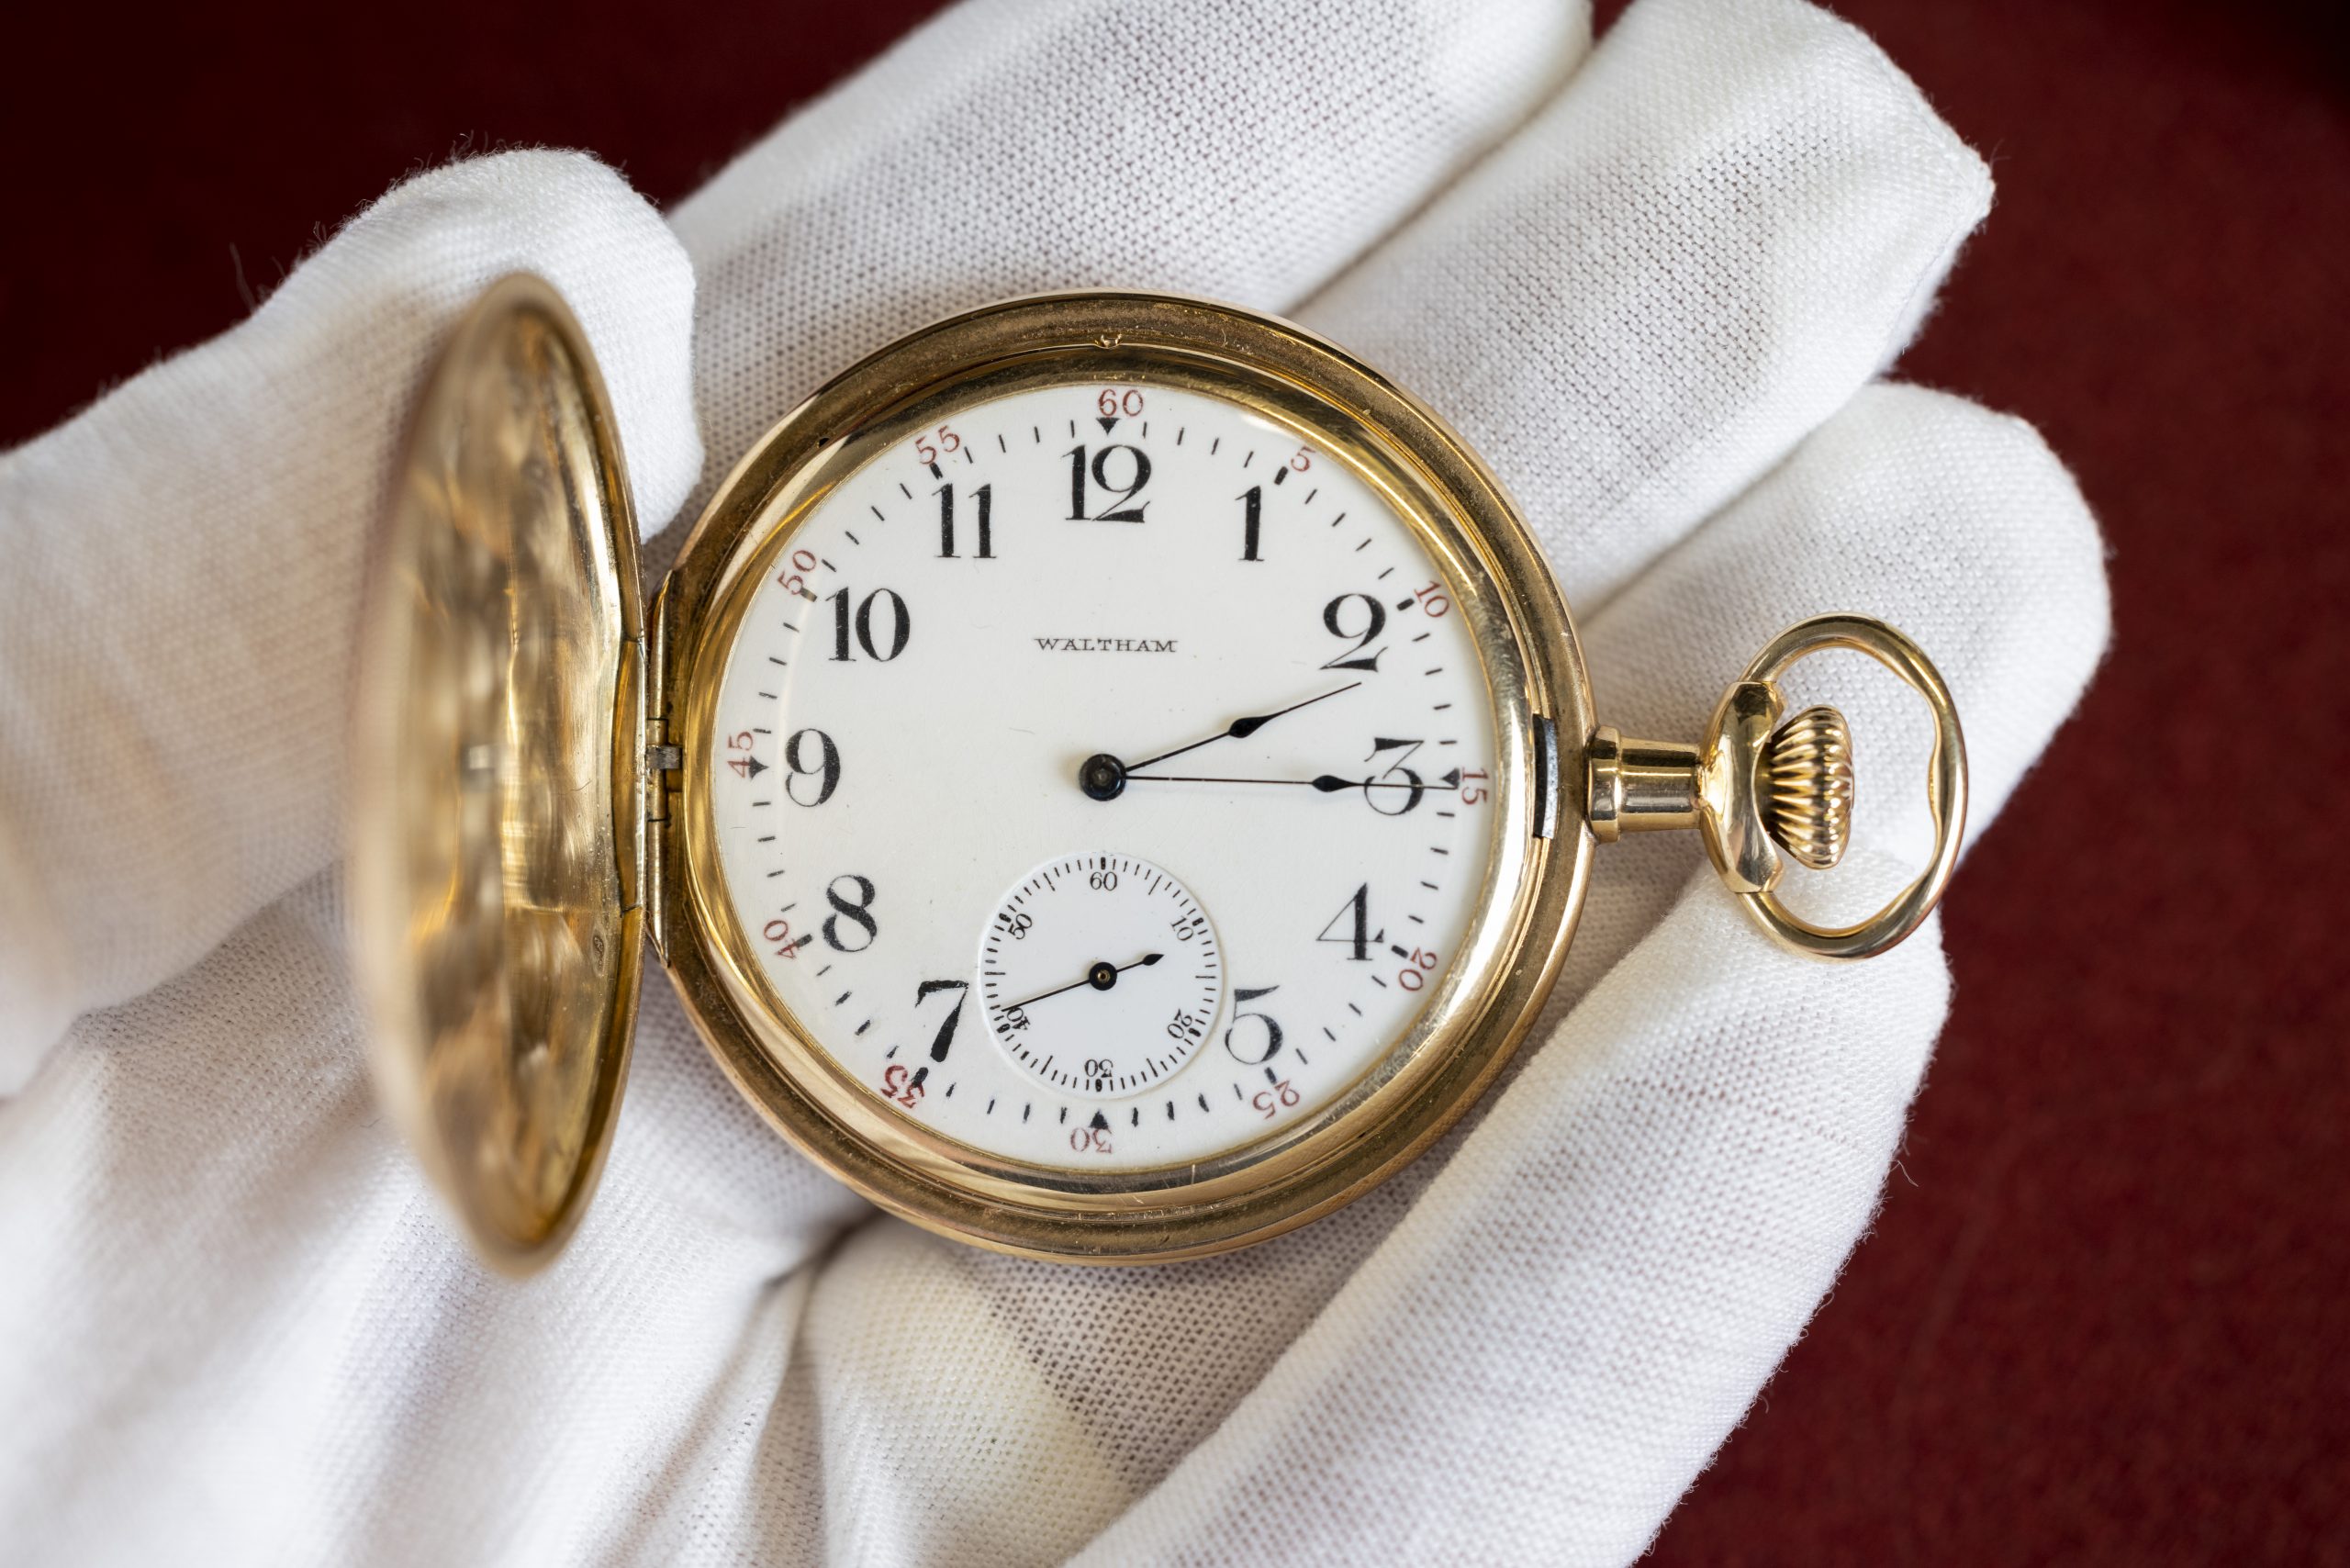 Gold pocket watch found on body of Titanic’s richest man after he went down with iconic ship goes on the market